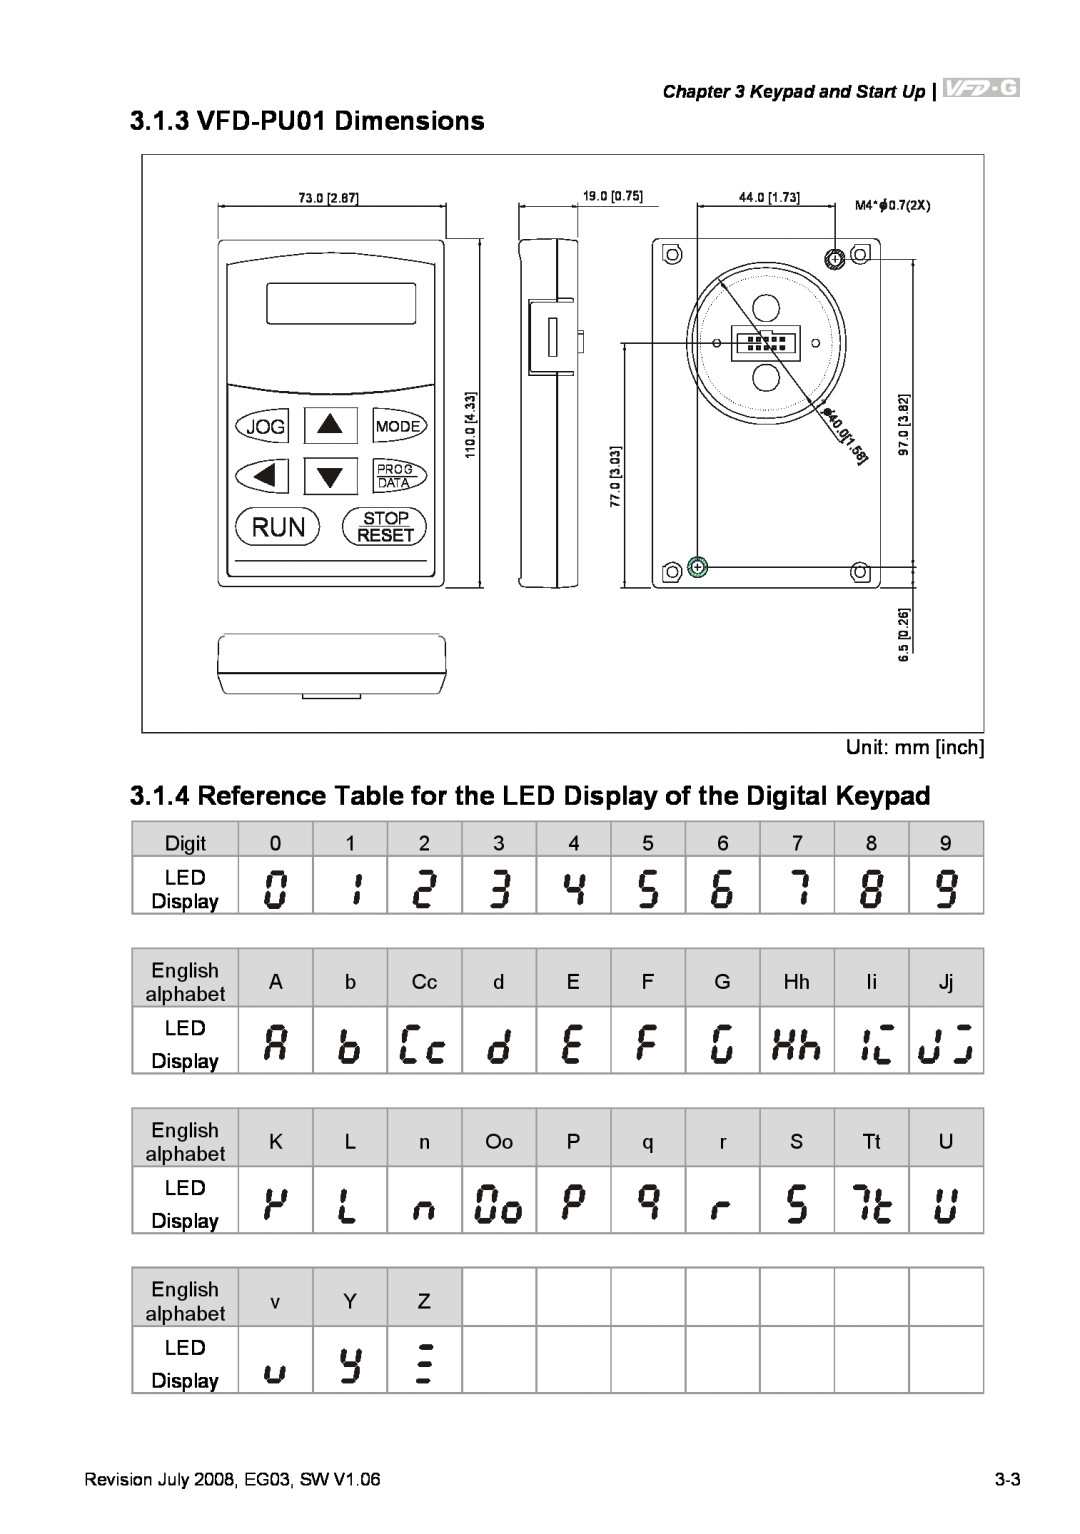 Delta Electronics VFD-G manual VFD-PU01 Dimensions, Reference Table for the LED Display of the Digital Keypad, Run Stop 